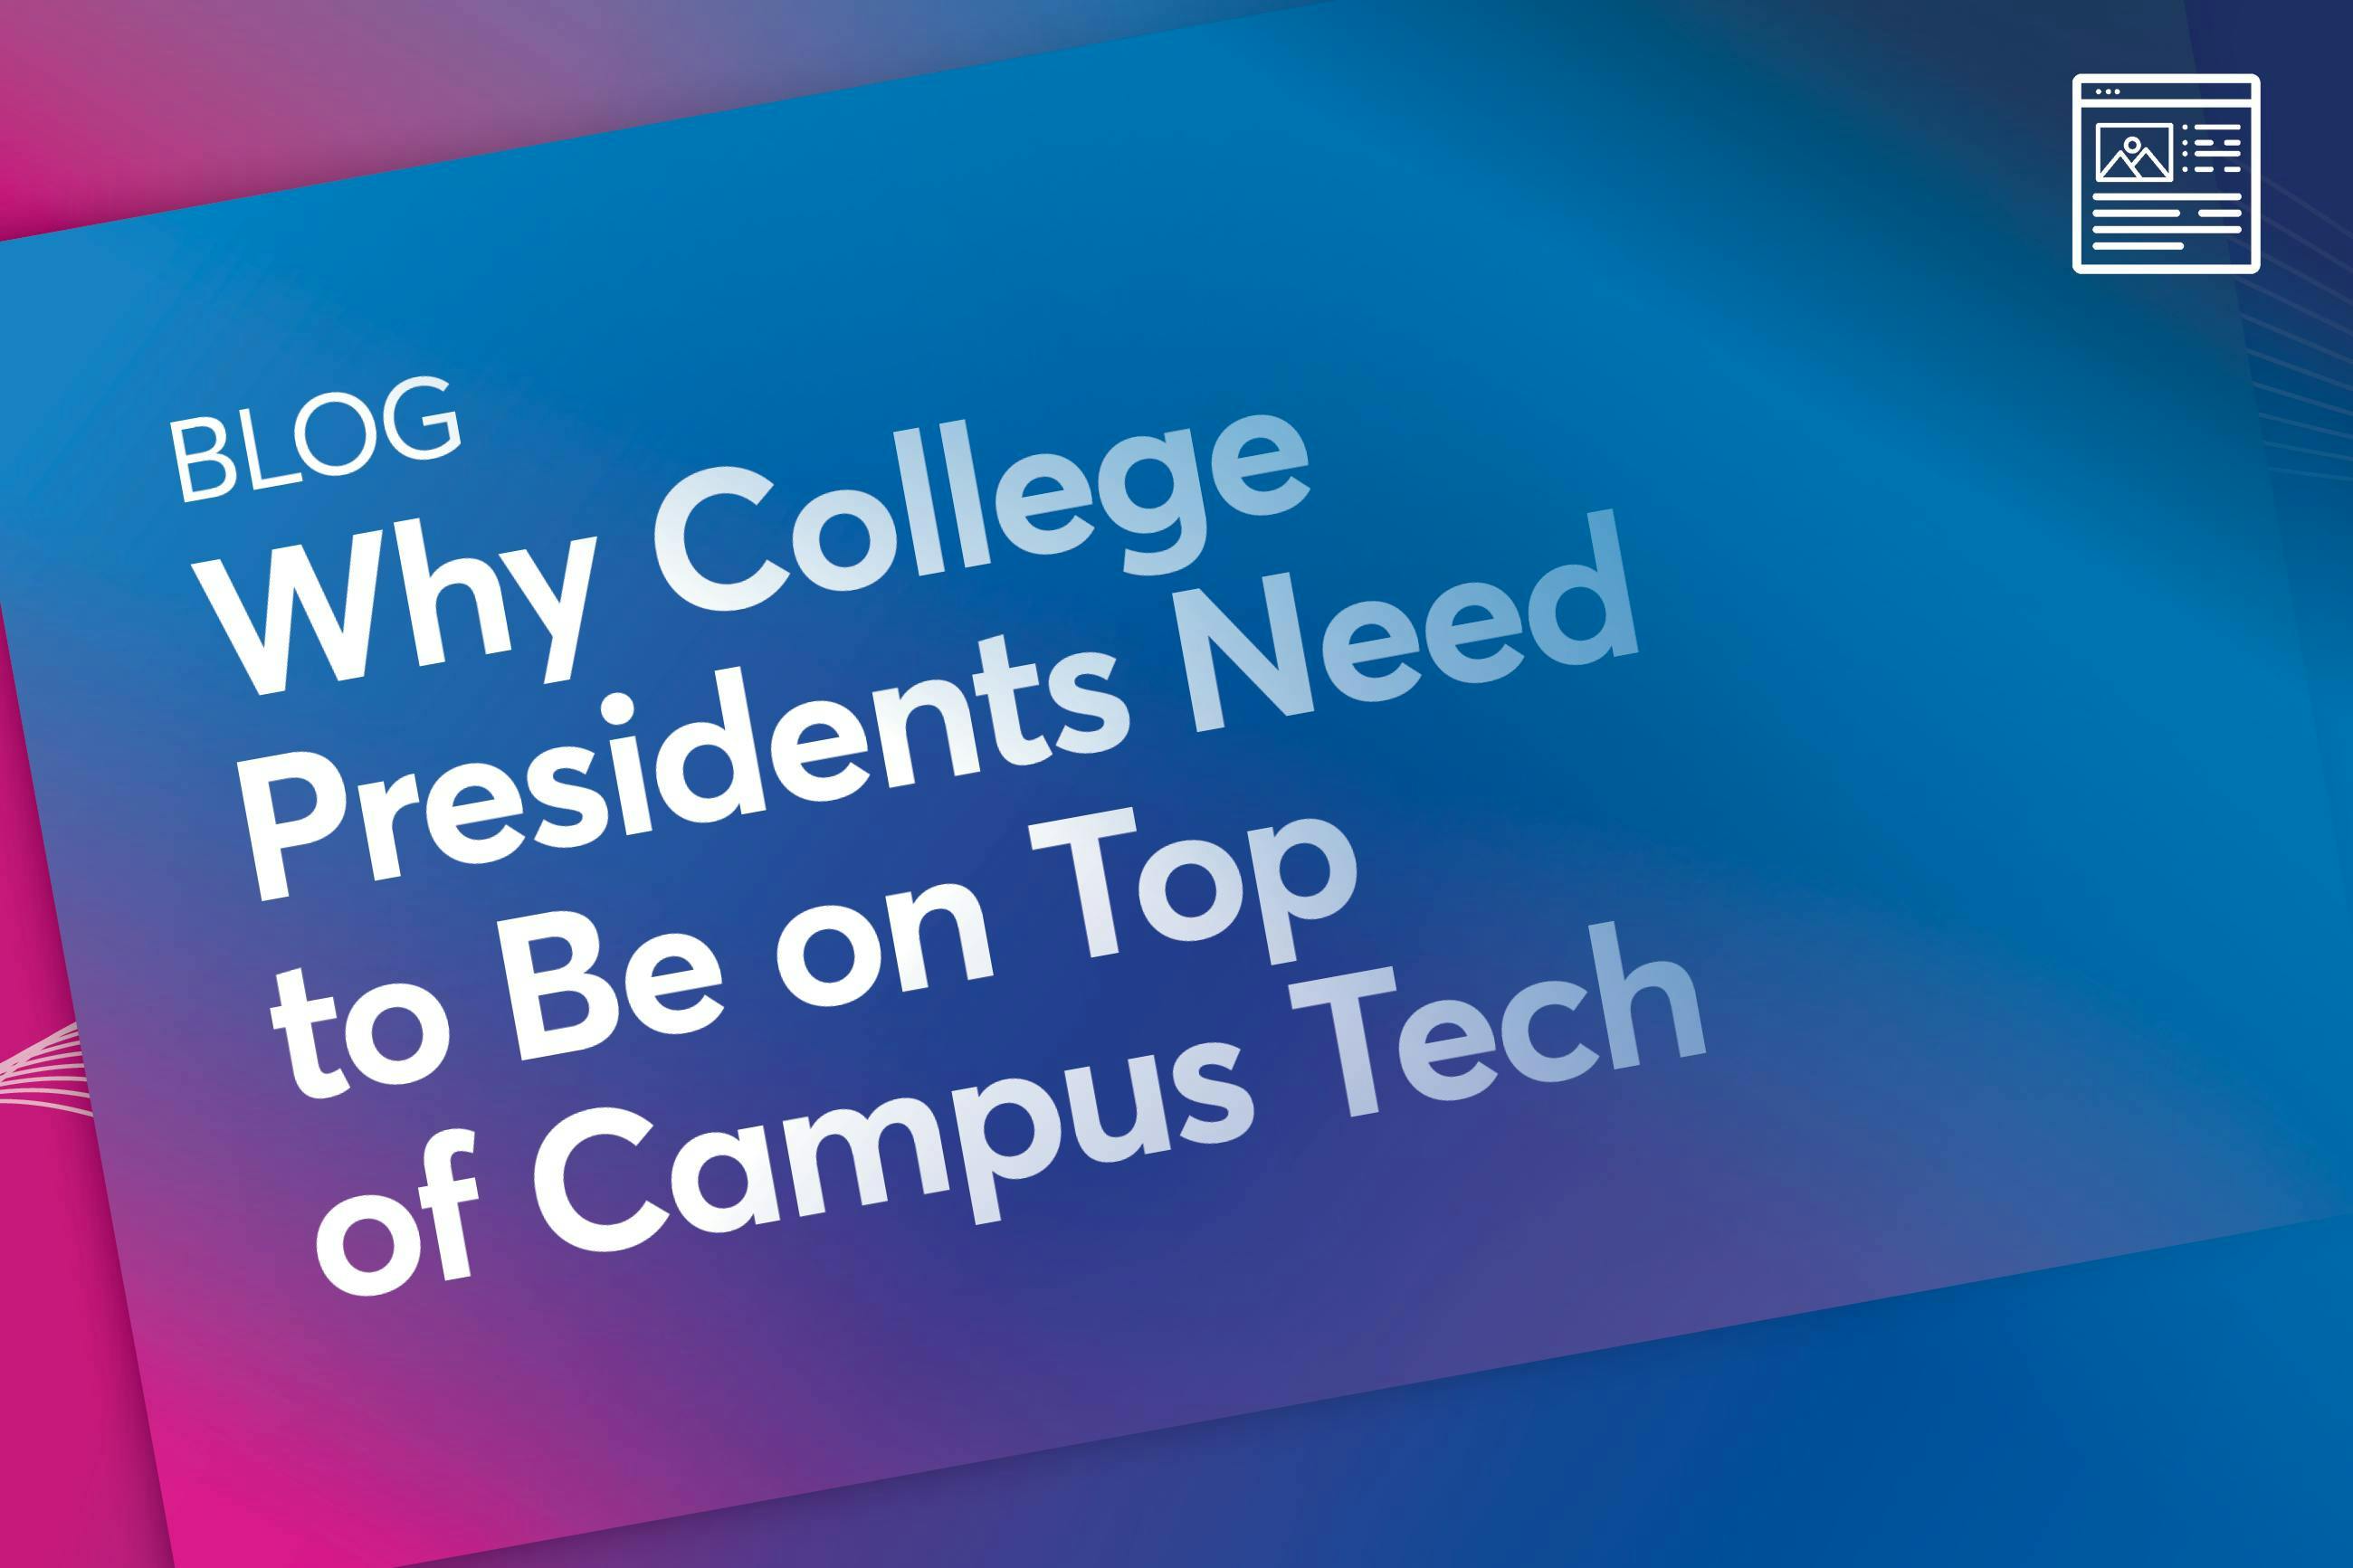 Blog: Why College Presidents Need to Be on Top of Campus Tech